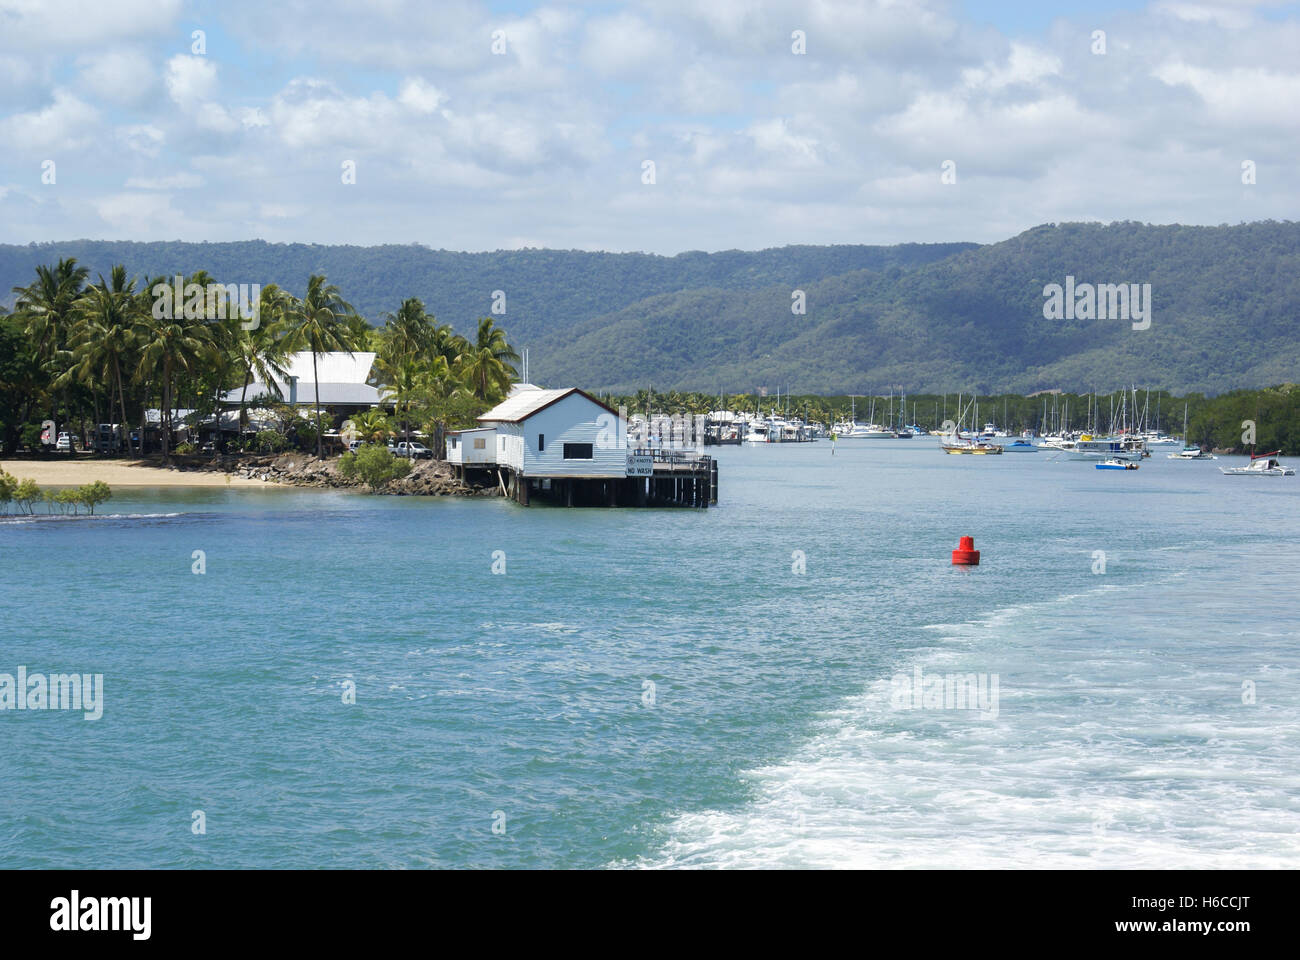 Boats in harbour at tropical Port Douglas, Australia Stock Photo